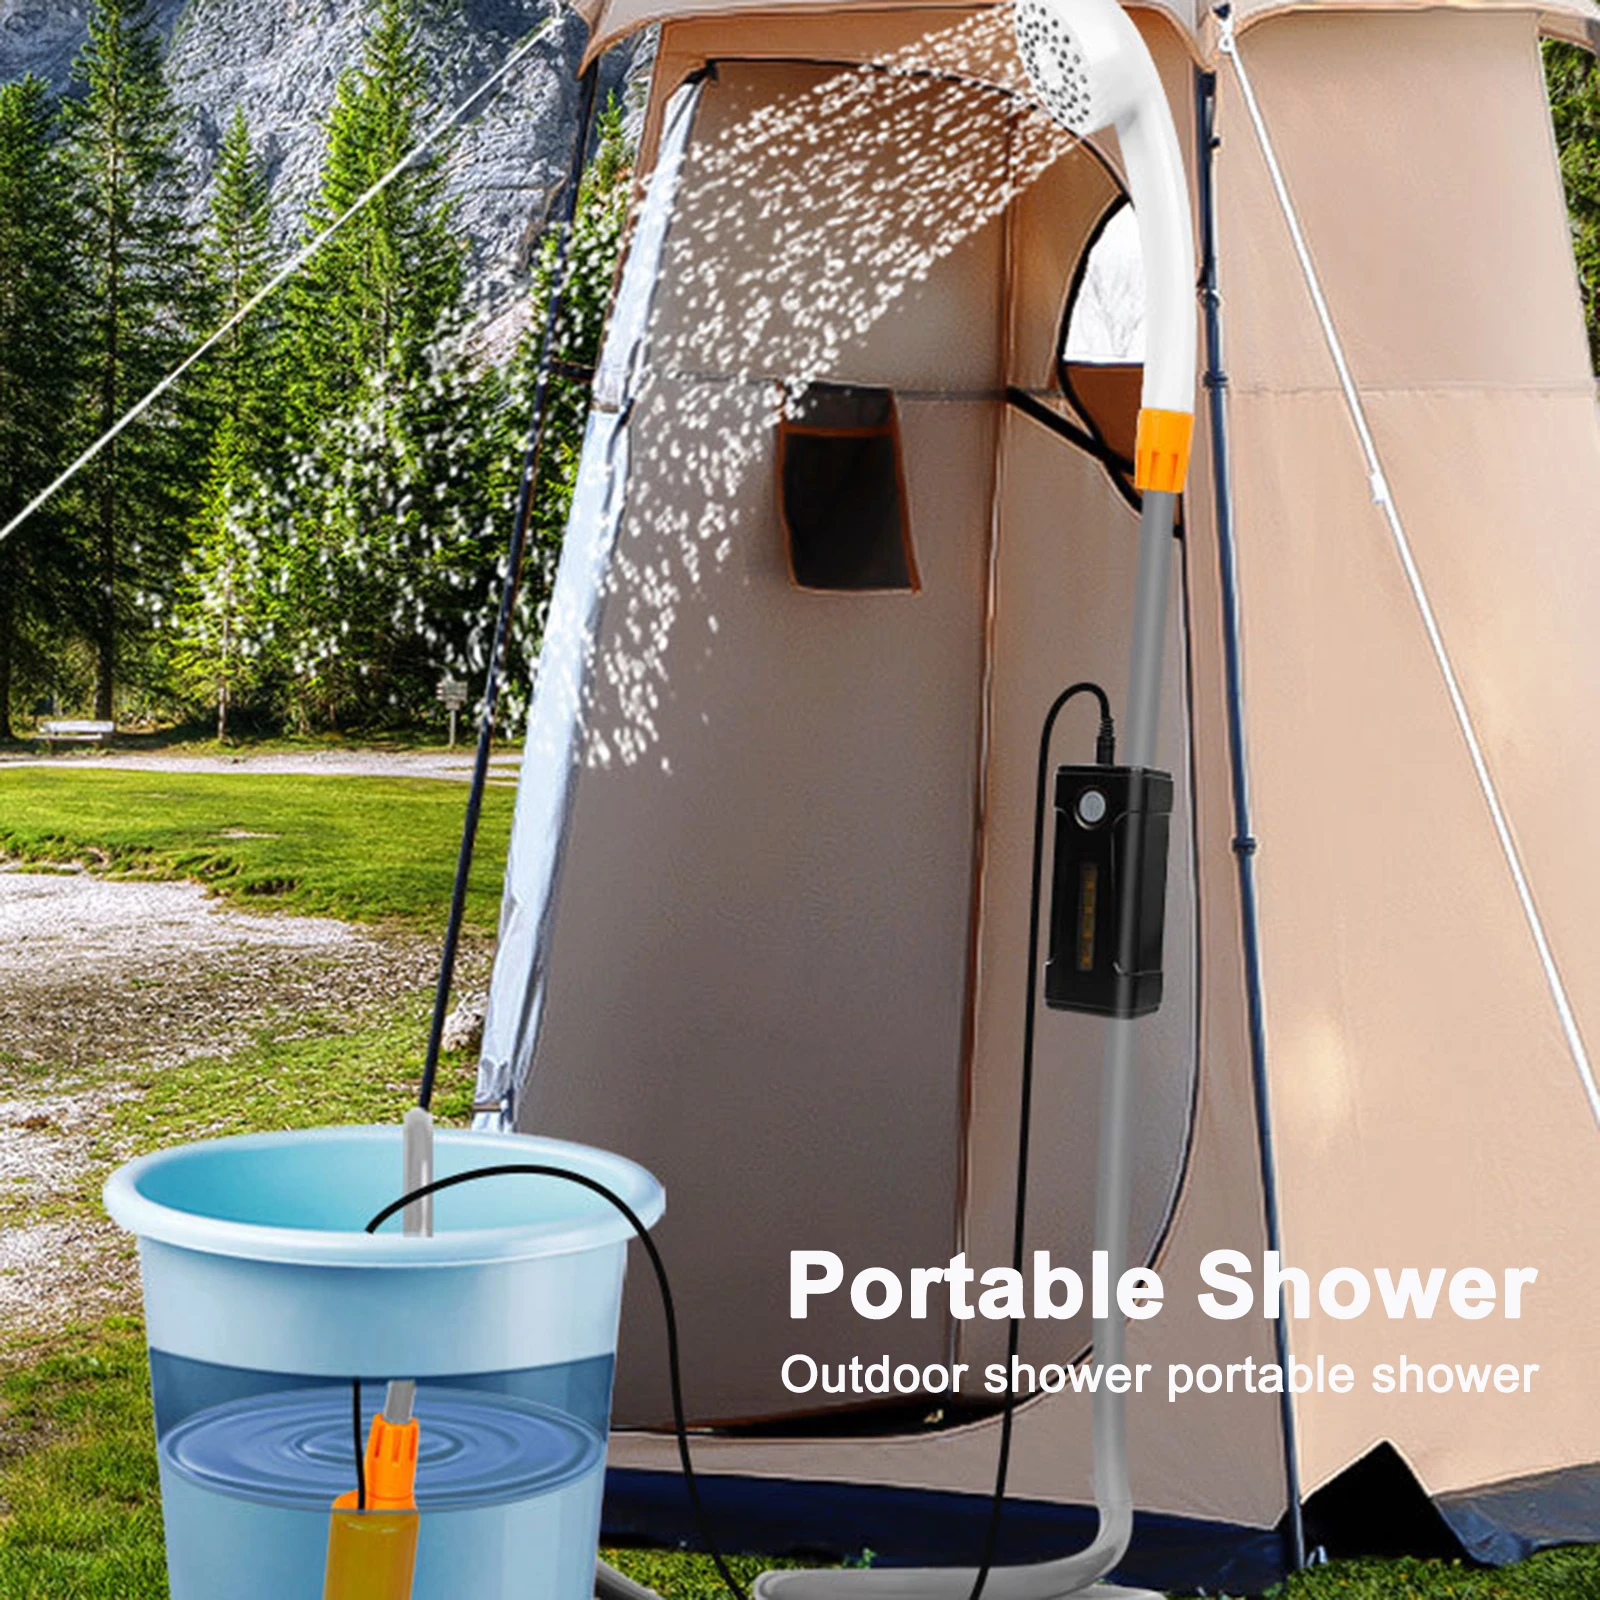 Portable Outdoor Camping Shower IPX7 Waterproof USB Rechargeable Electric  Shower Pump for Camping Car Washing Gardening Pet Wash - AliExpress